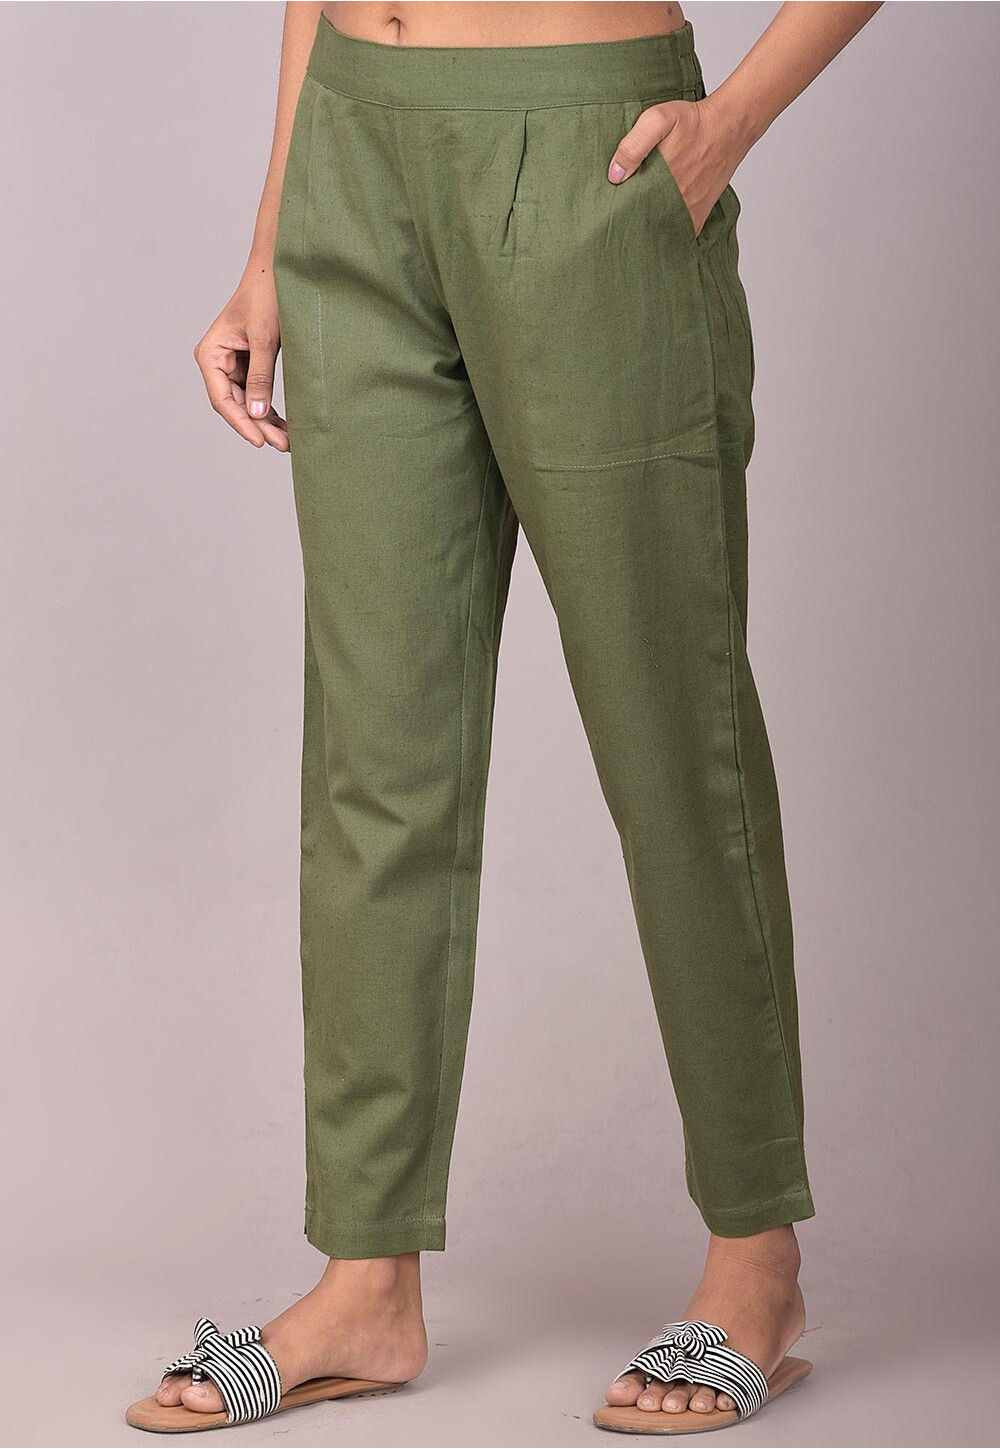 Womens Cargo Pants Comfortable and classy clothing  Cargo pants women  Clothes Classy outfits